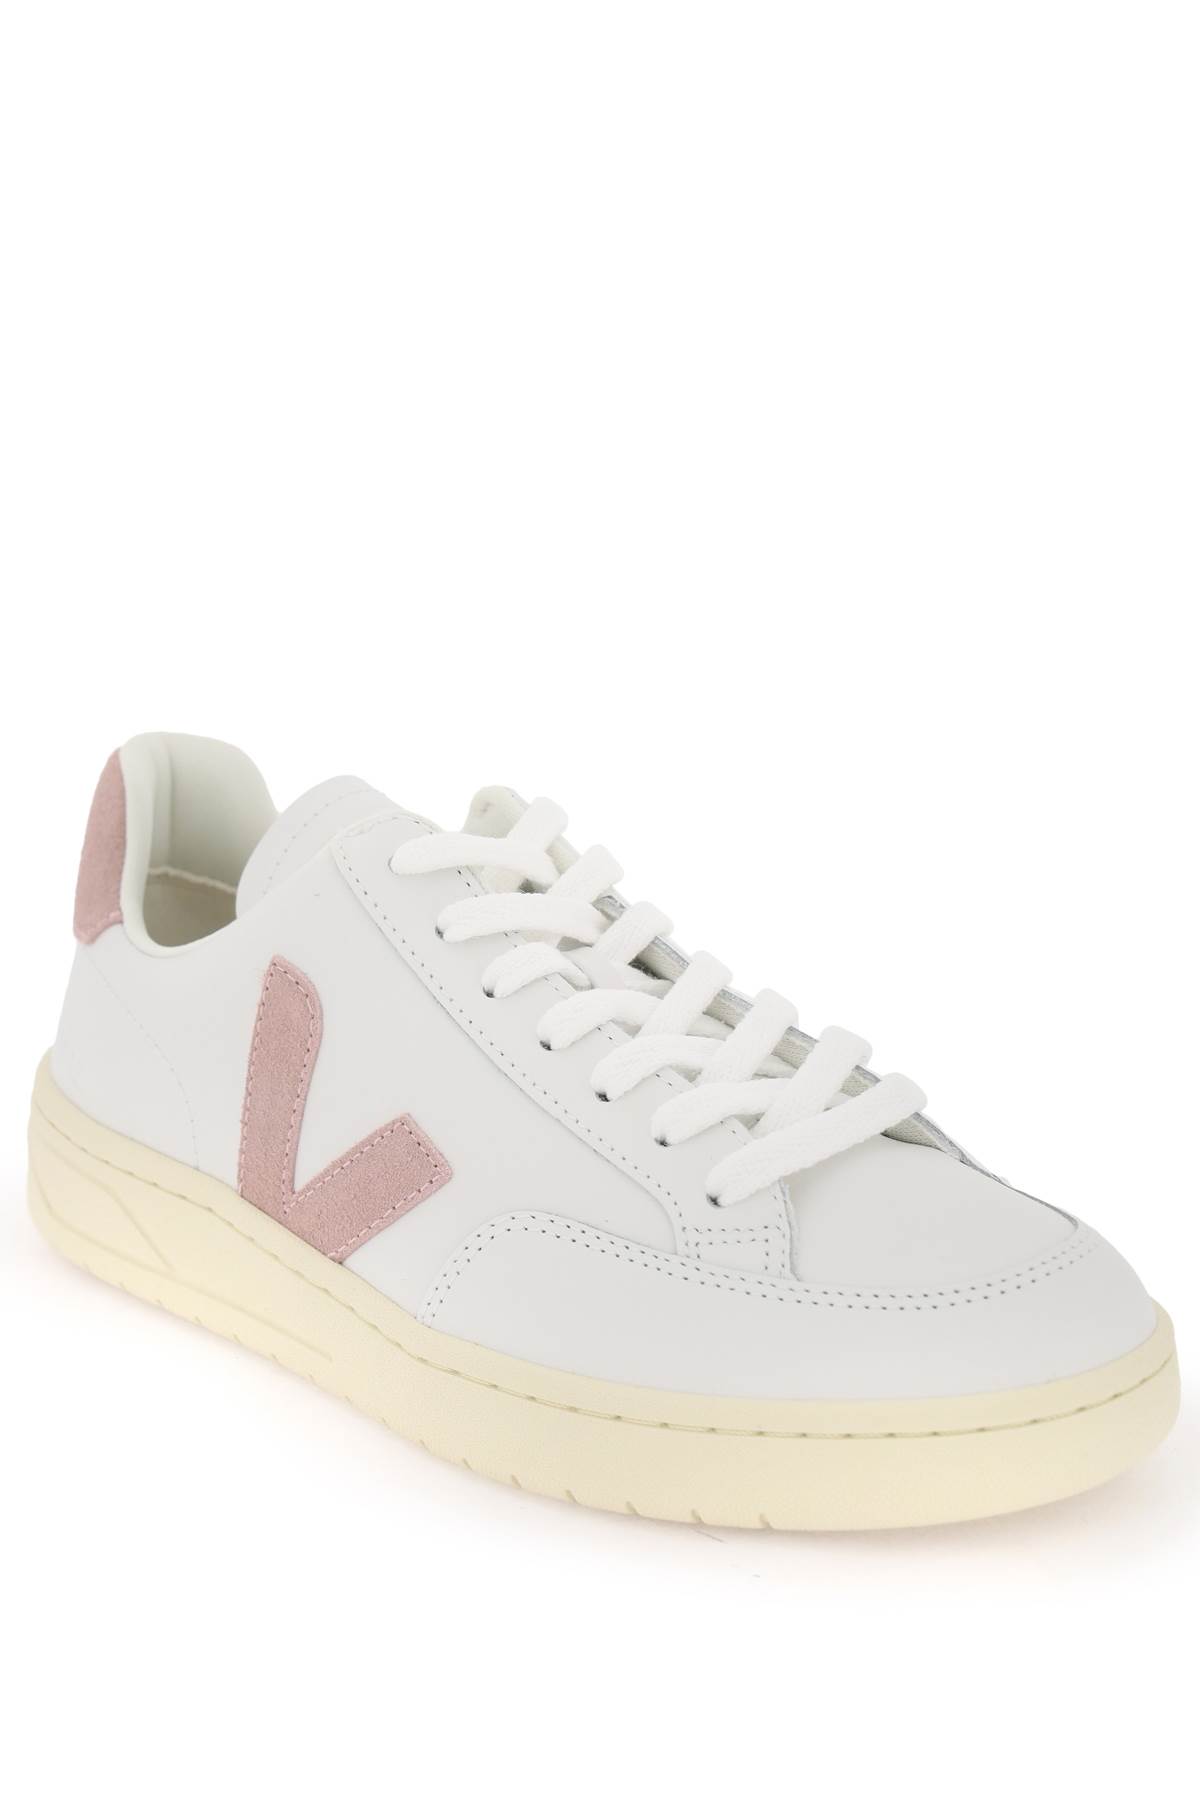 Shop Veja Leather V-12 Sneakers In Extra White Babe (white)